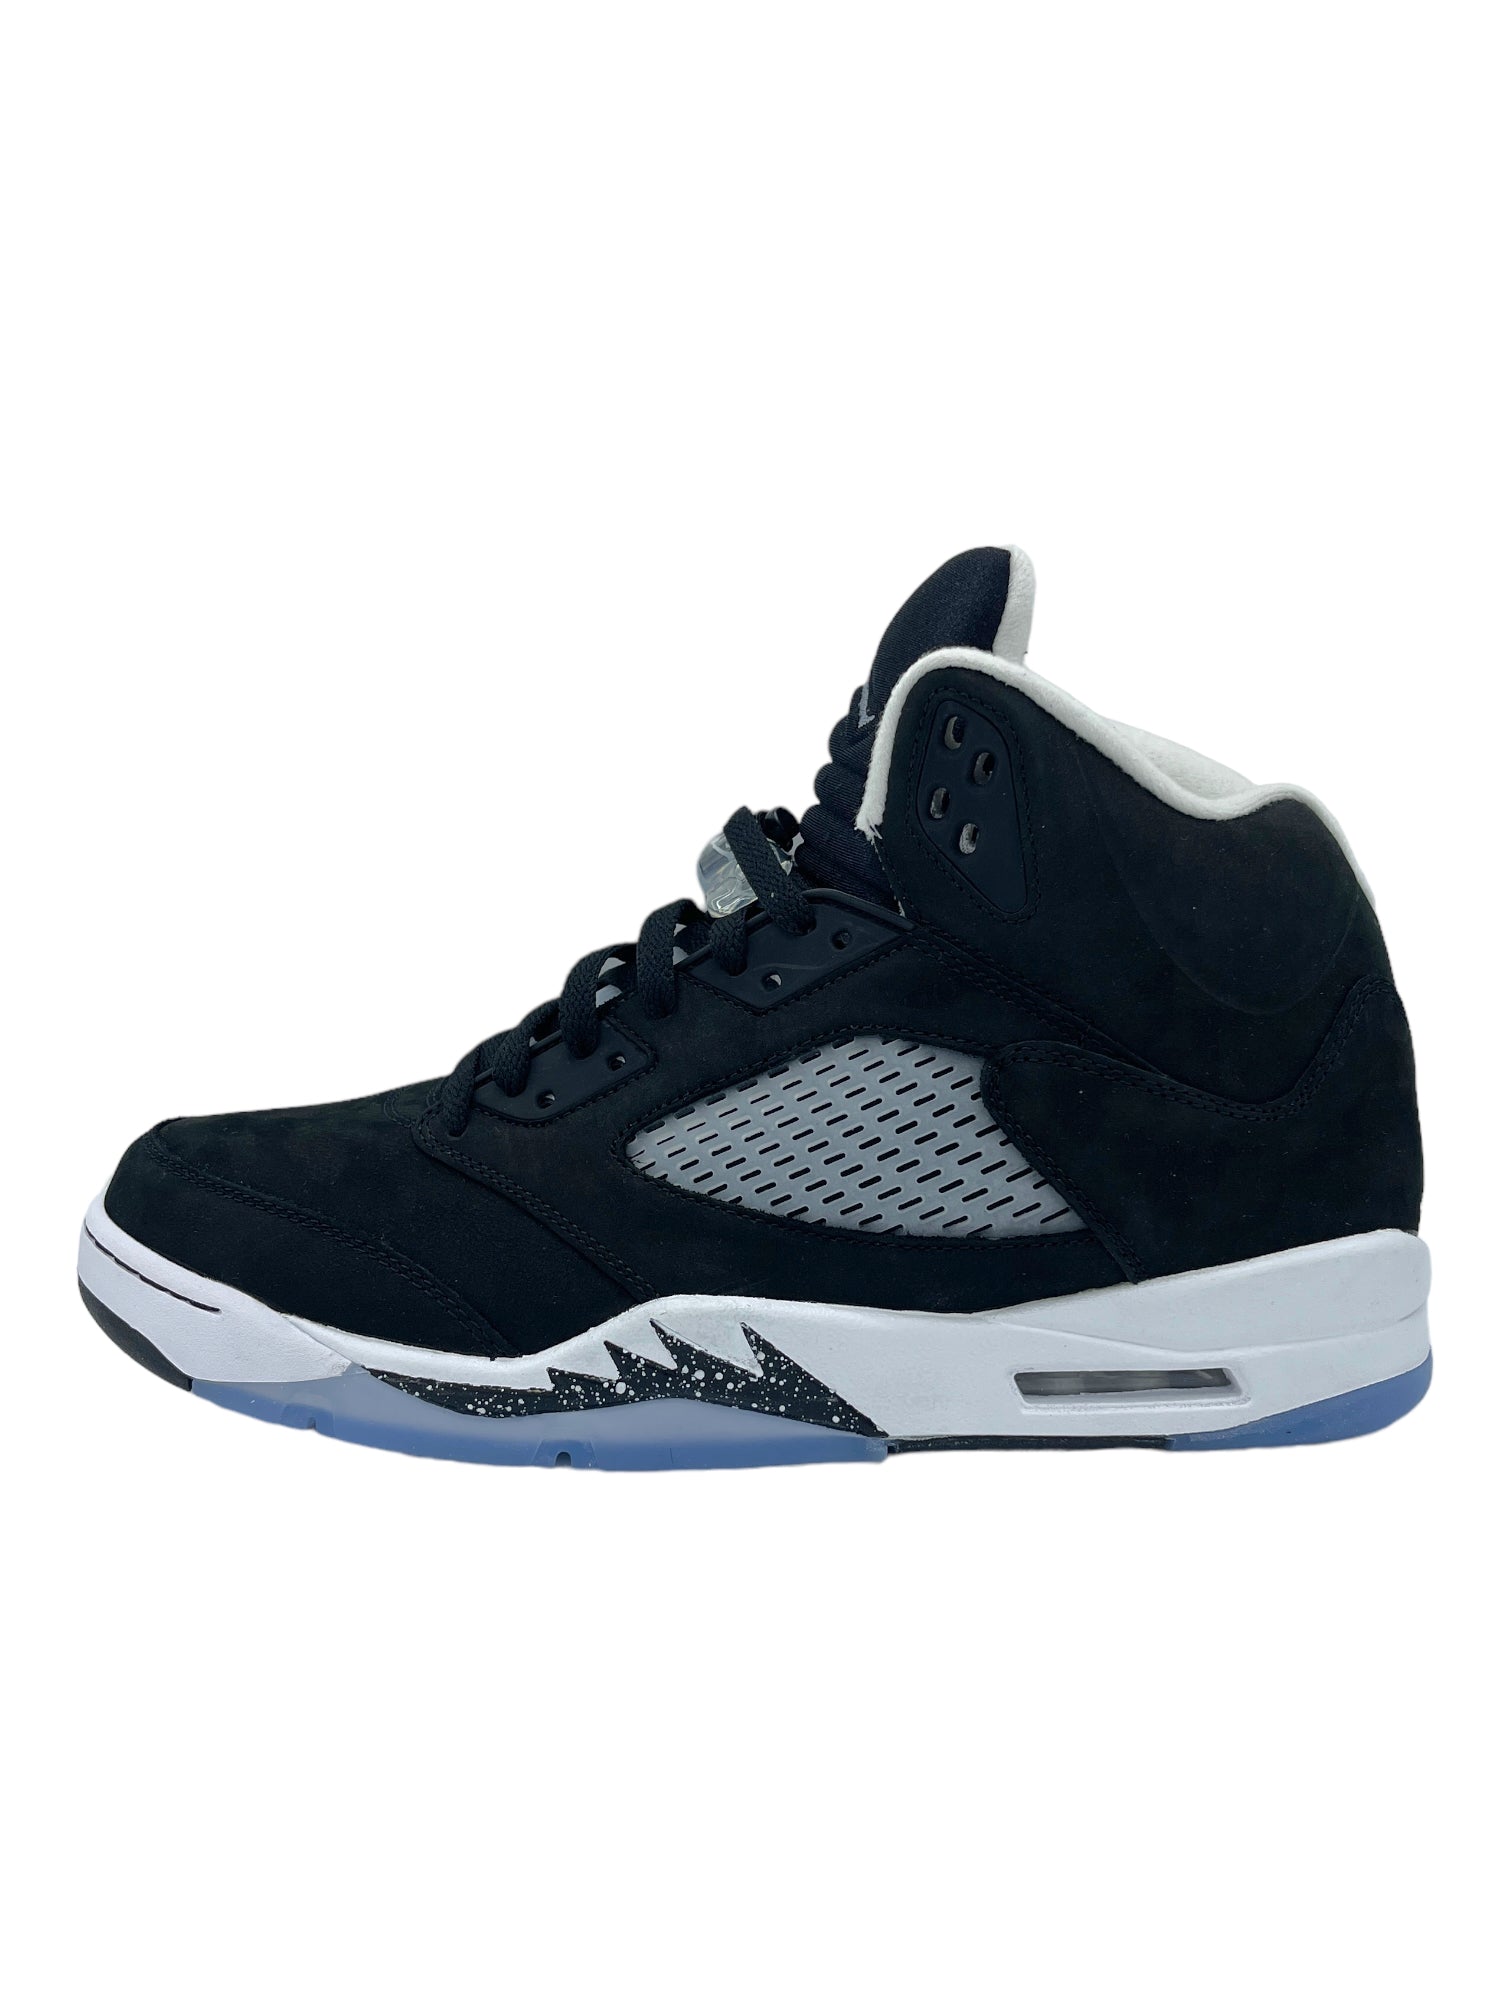 Nike Air Jordan 5 Retro ‘Moonlight’ Sneakers - Genuine Design Luxury Consignment for Men. New & Pre-Owned Clothing, Shoes, & Accessories. Calgary, Canada